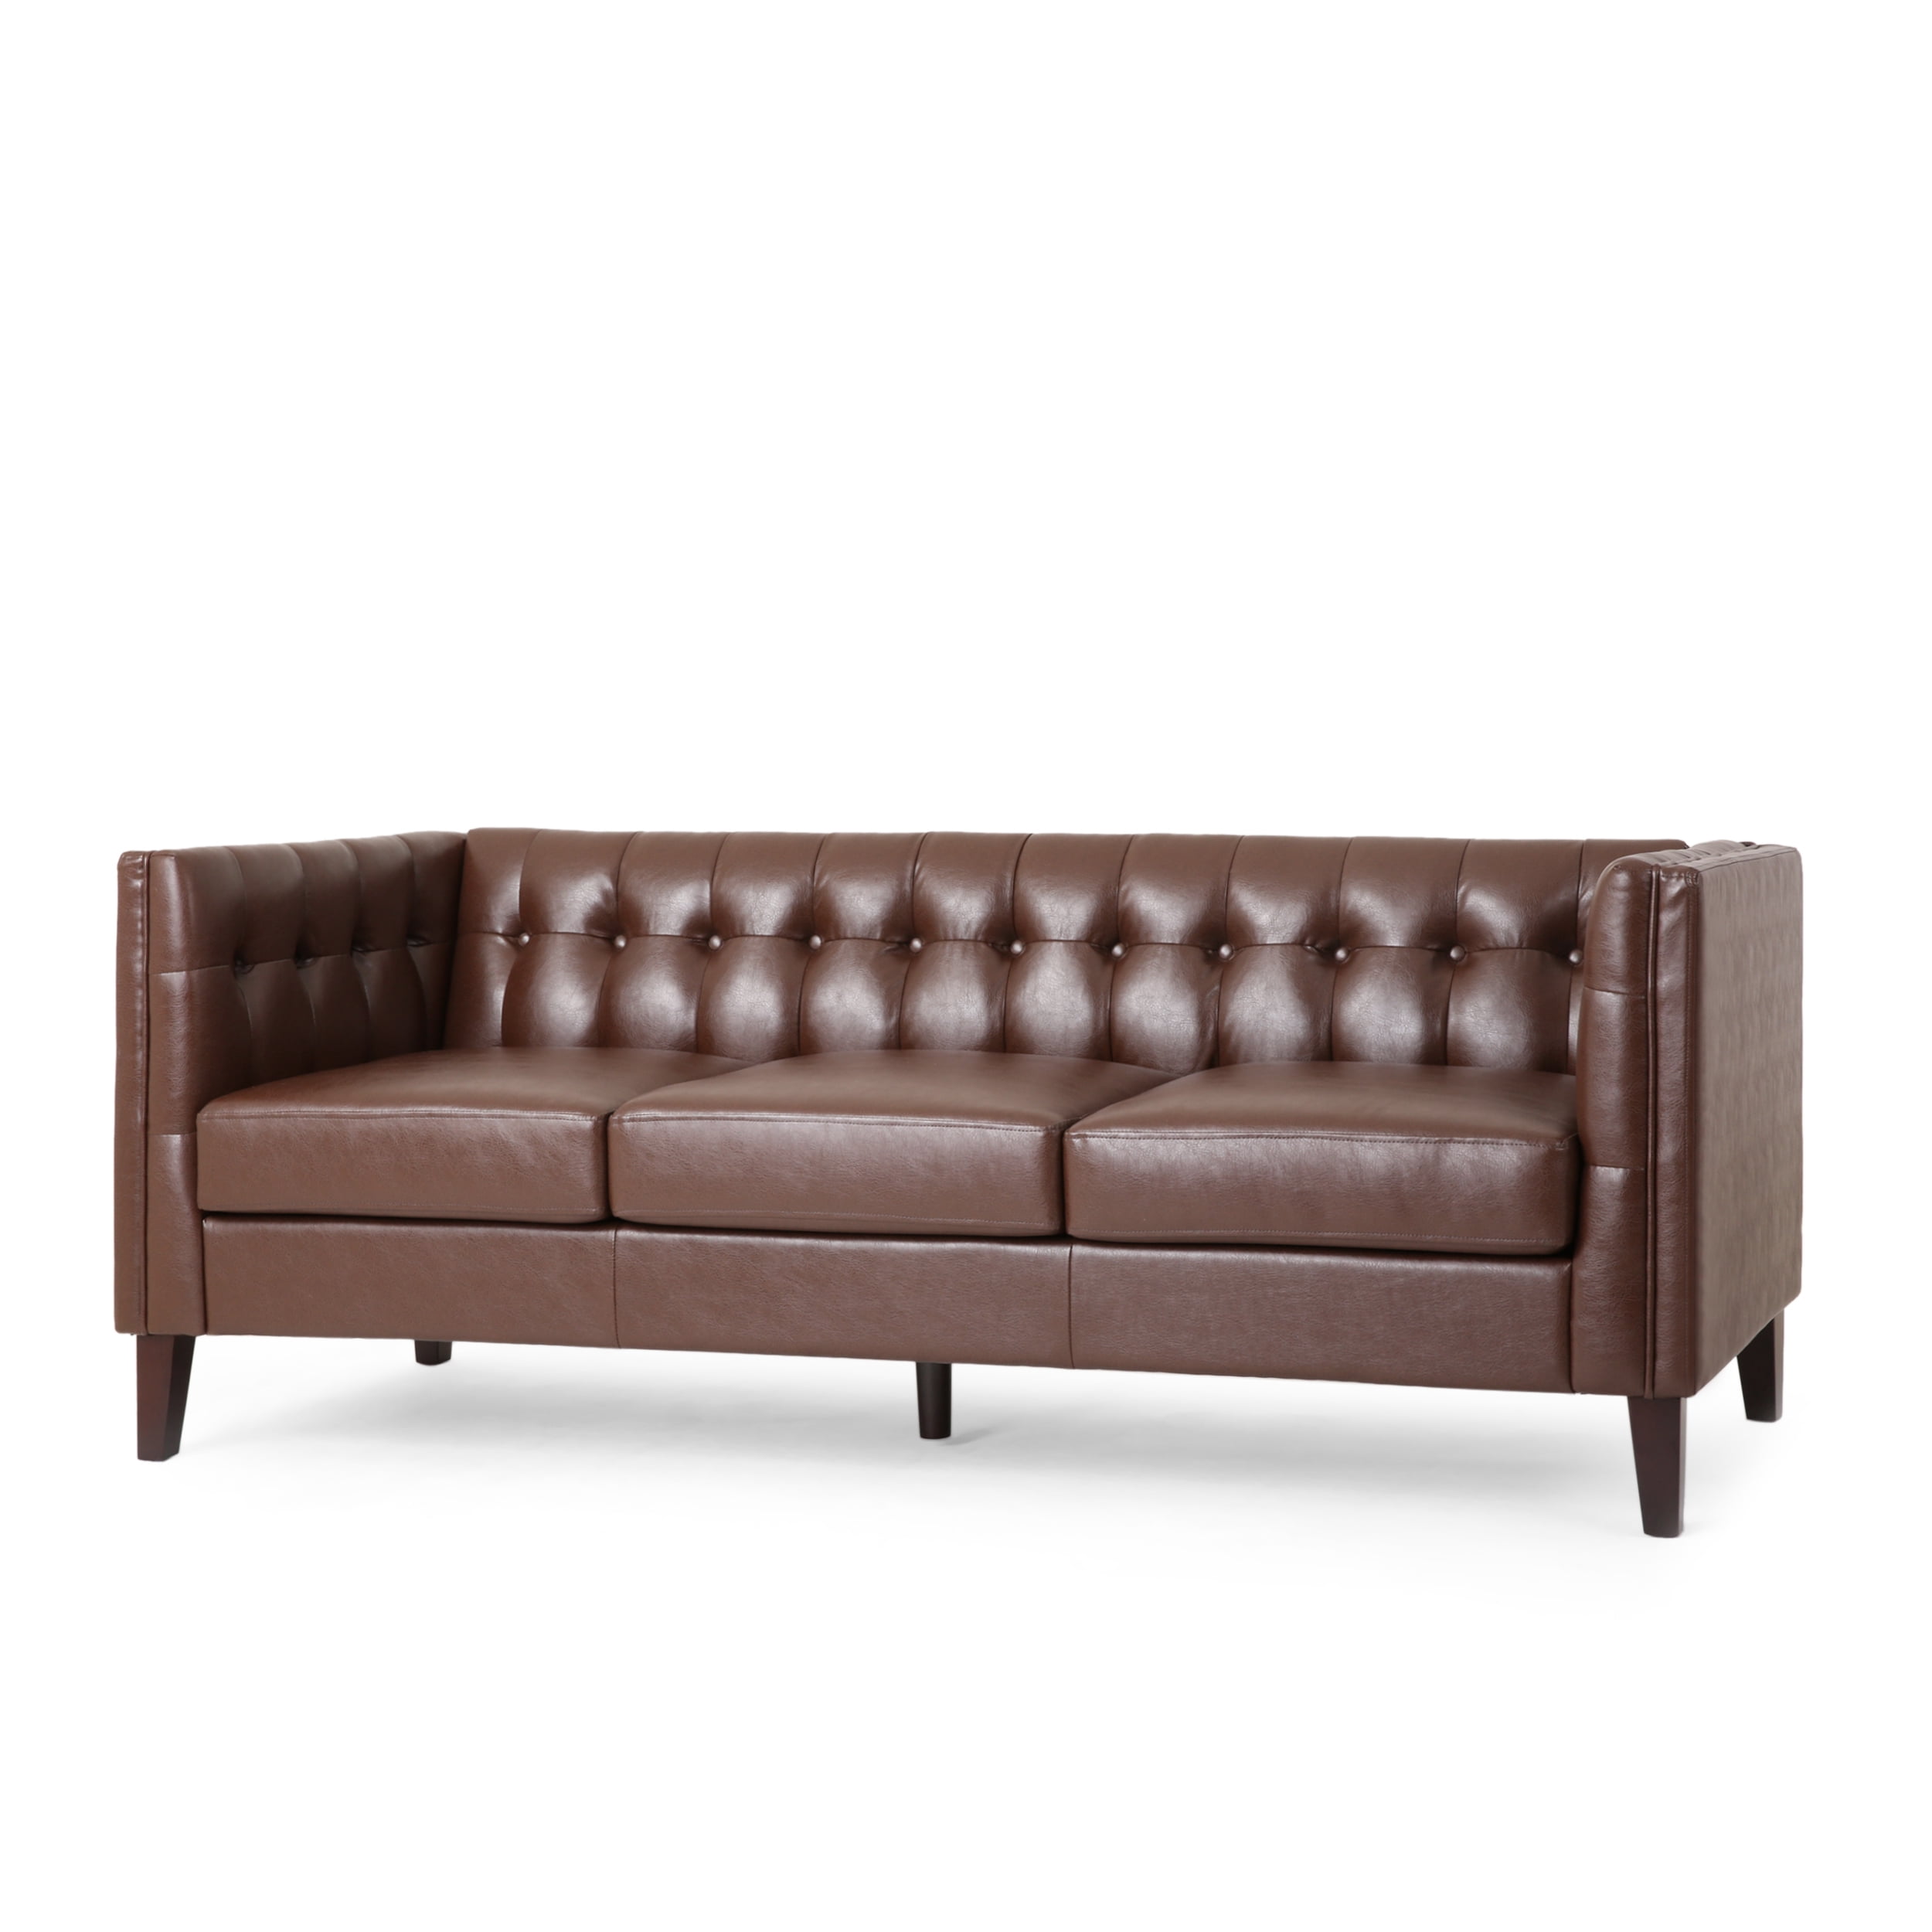 Noble House Sadlier Faux Leather Tufted 3 Seater Sofa, Dark Brown ...